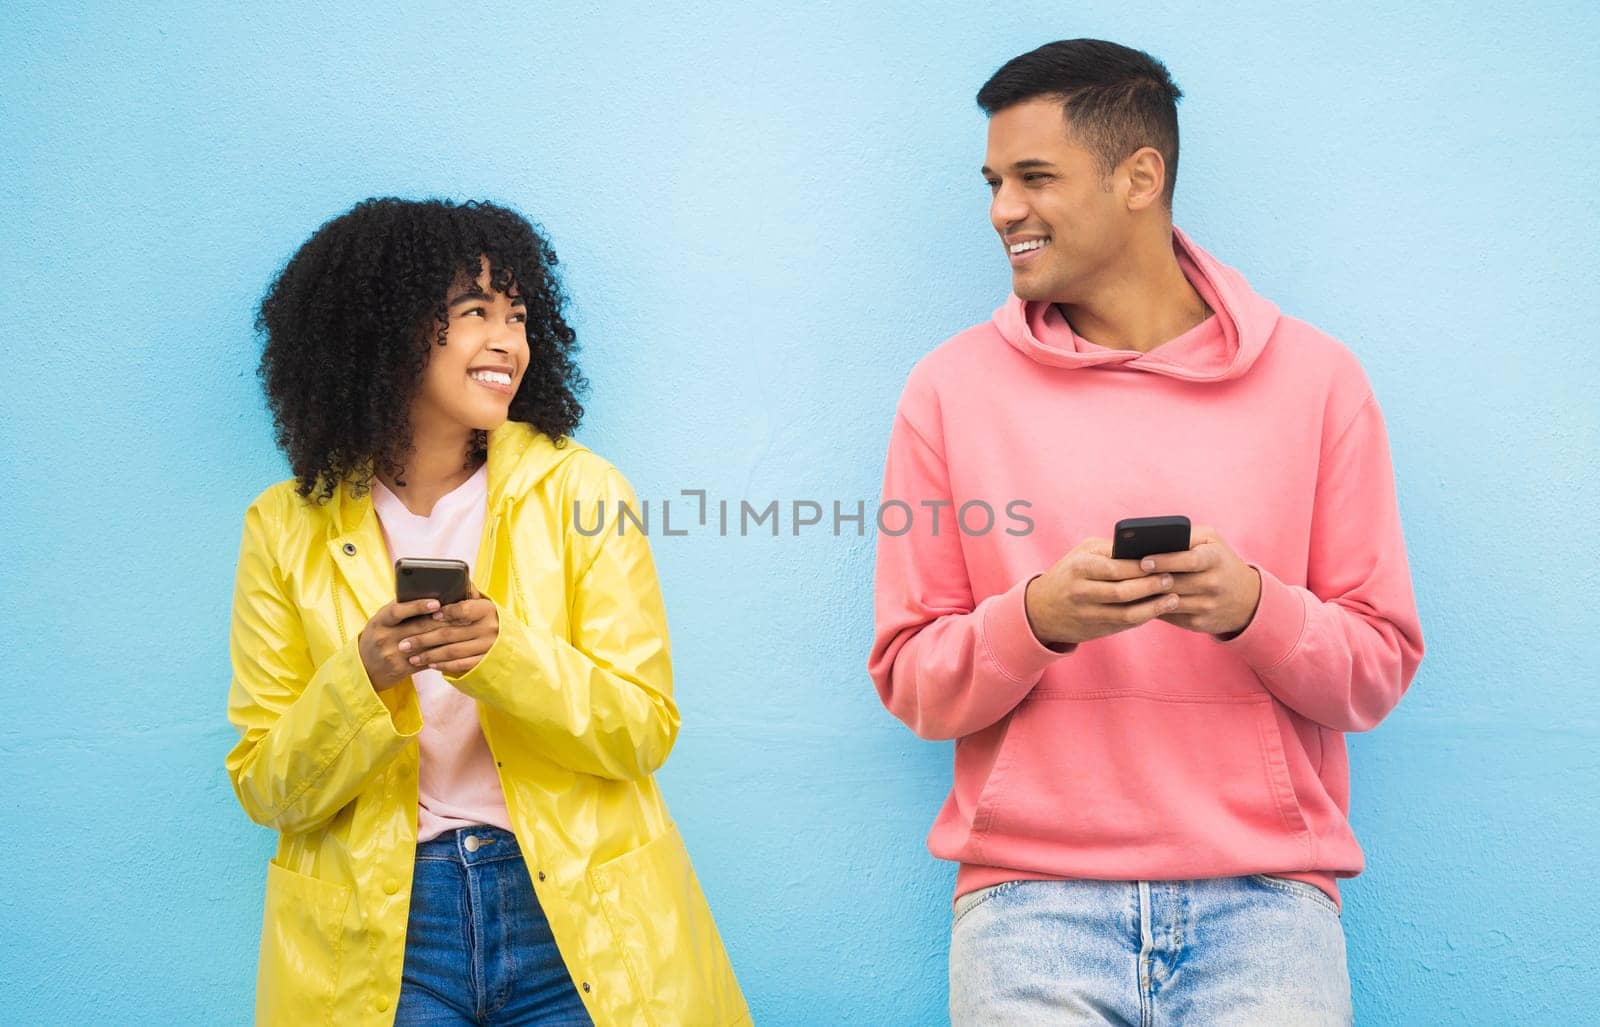 Friends, phone and smile for social media, conversation or communication against a blue studio background. Happy man and woman smiling for networking, 5G connection or chatting on mobile smartphone.